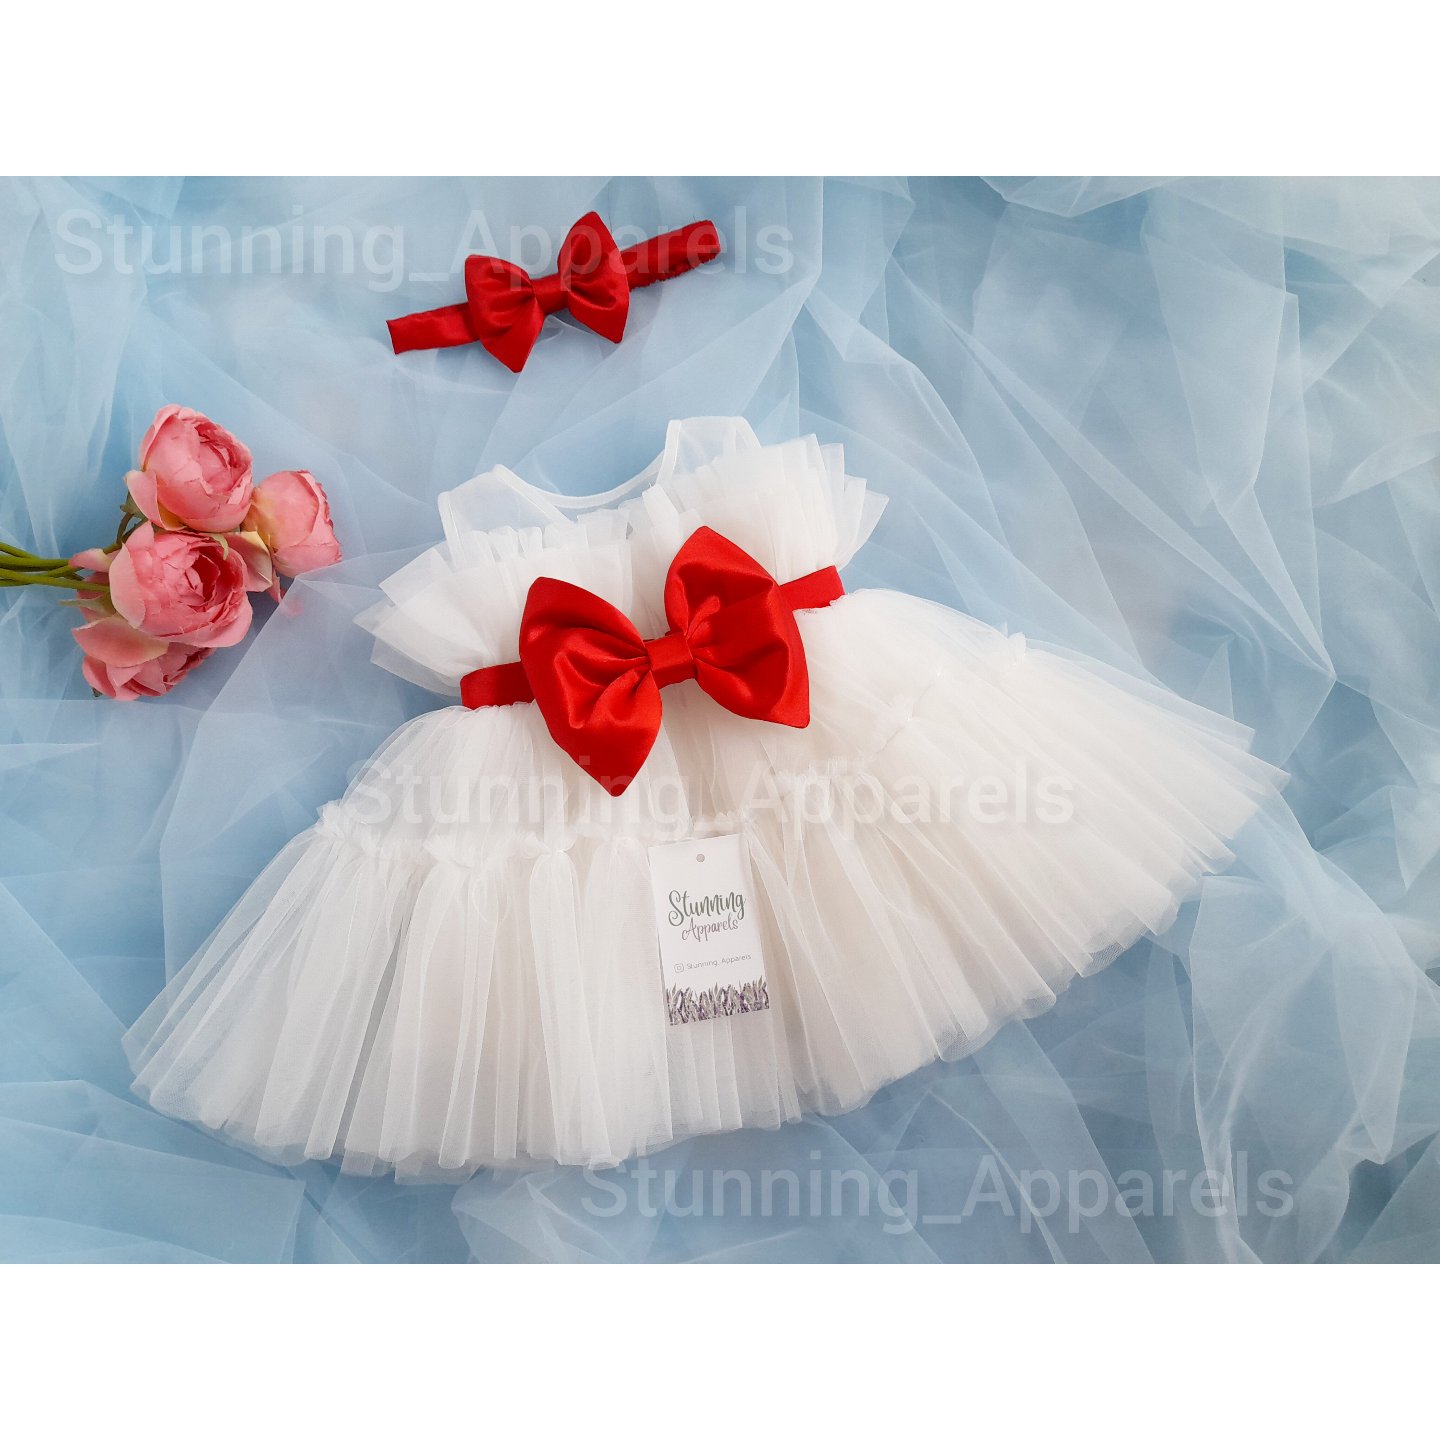 Red Satin Bow Ruffled Partywear White Frock  - 9-12 Month